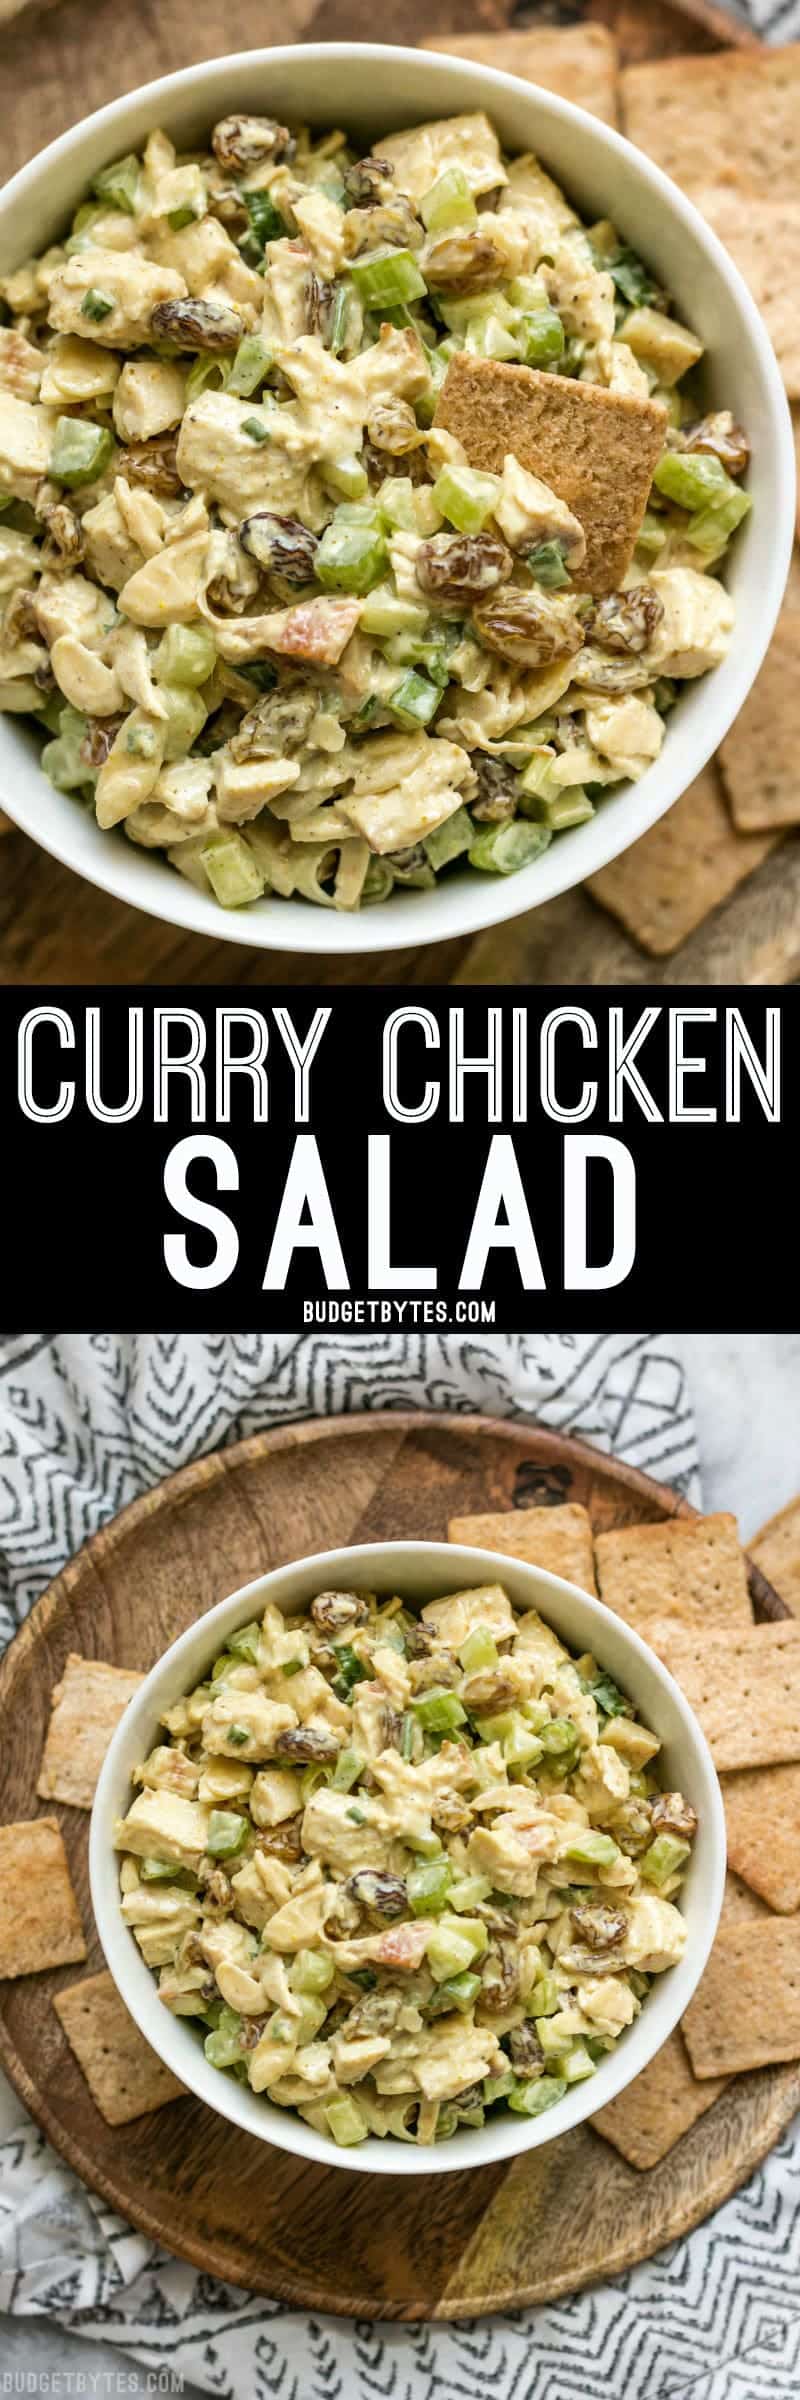 Curry Chicken Salad is a quick and tasty alternative to your traditional chicken salad with exotic curry spices, sweet raisins, and crunchy almonds. BudgetBytes.com